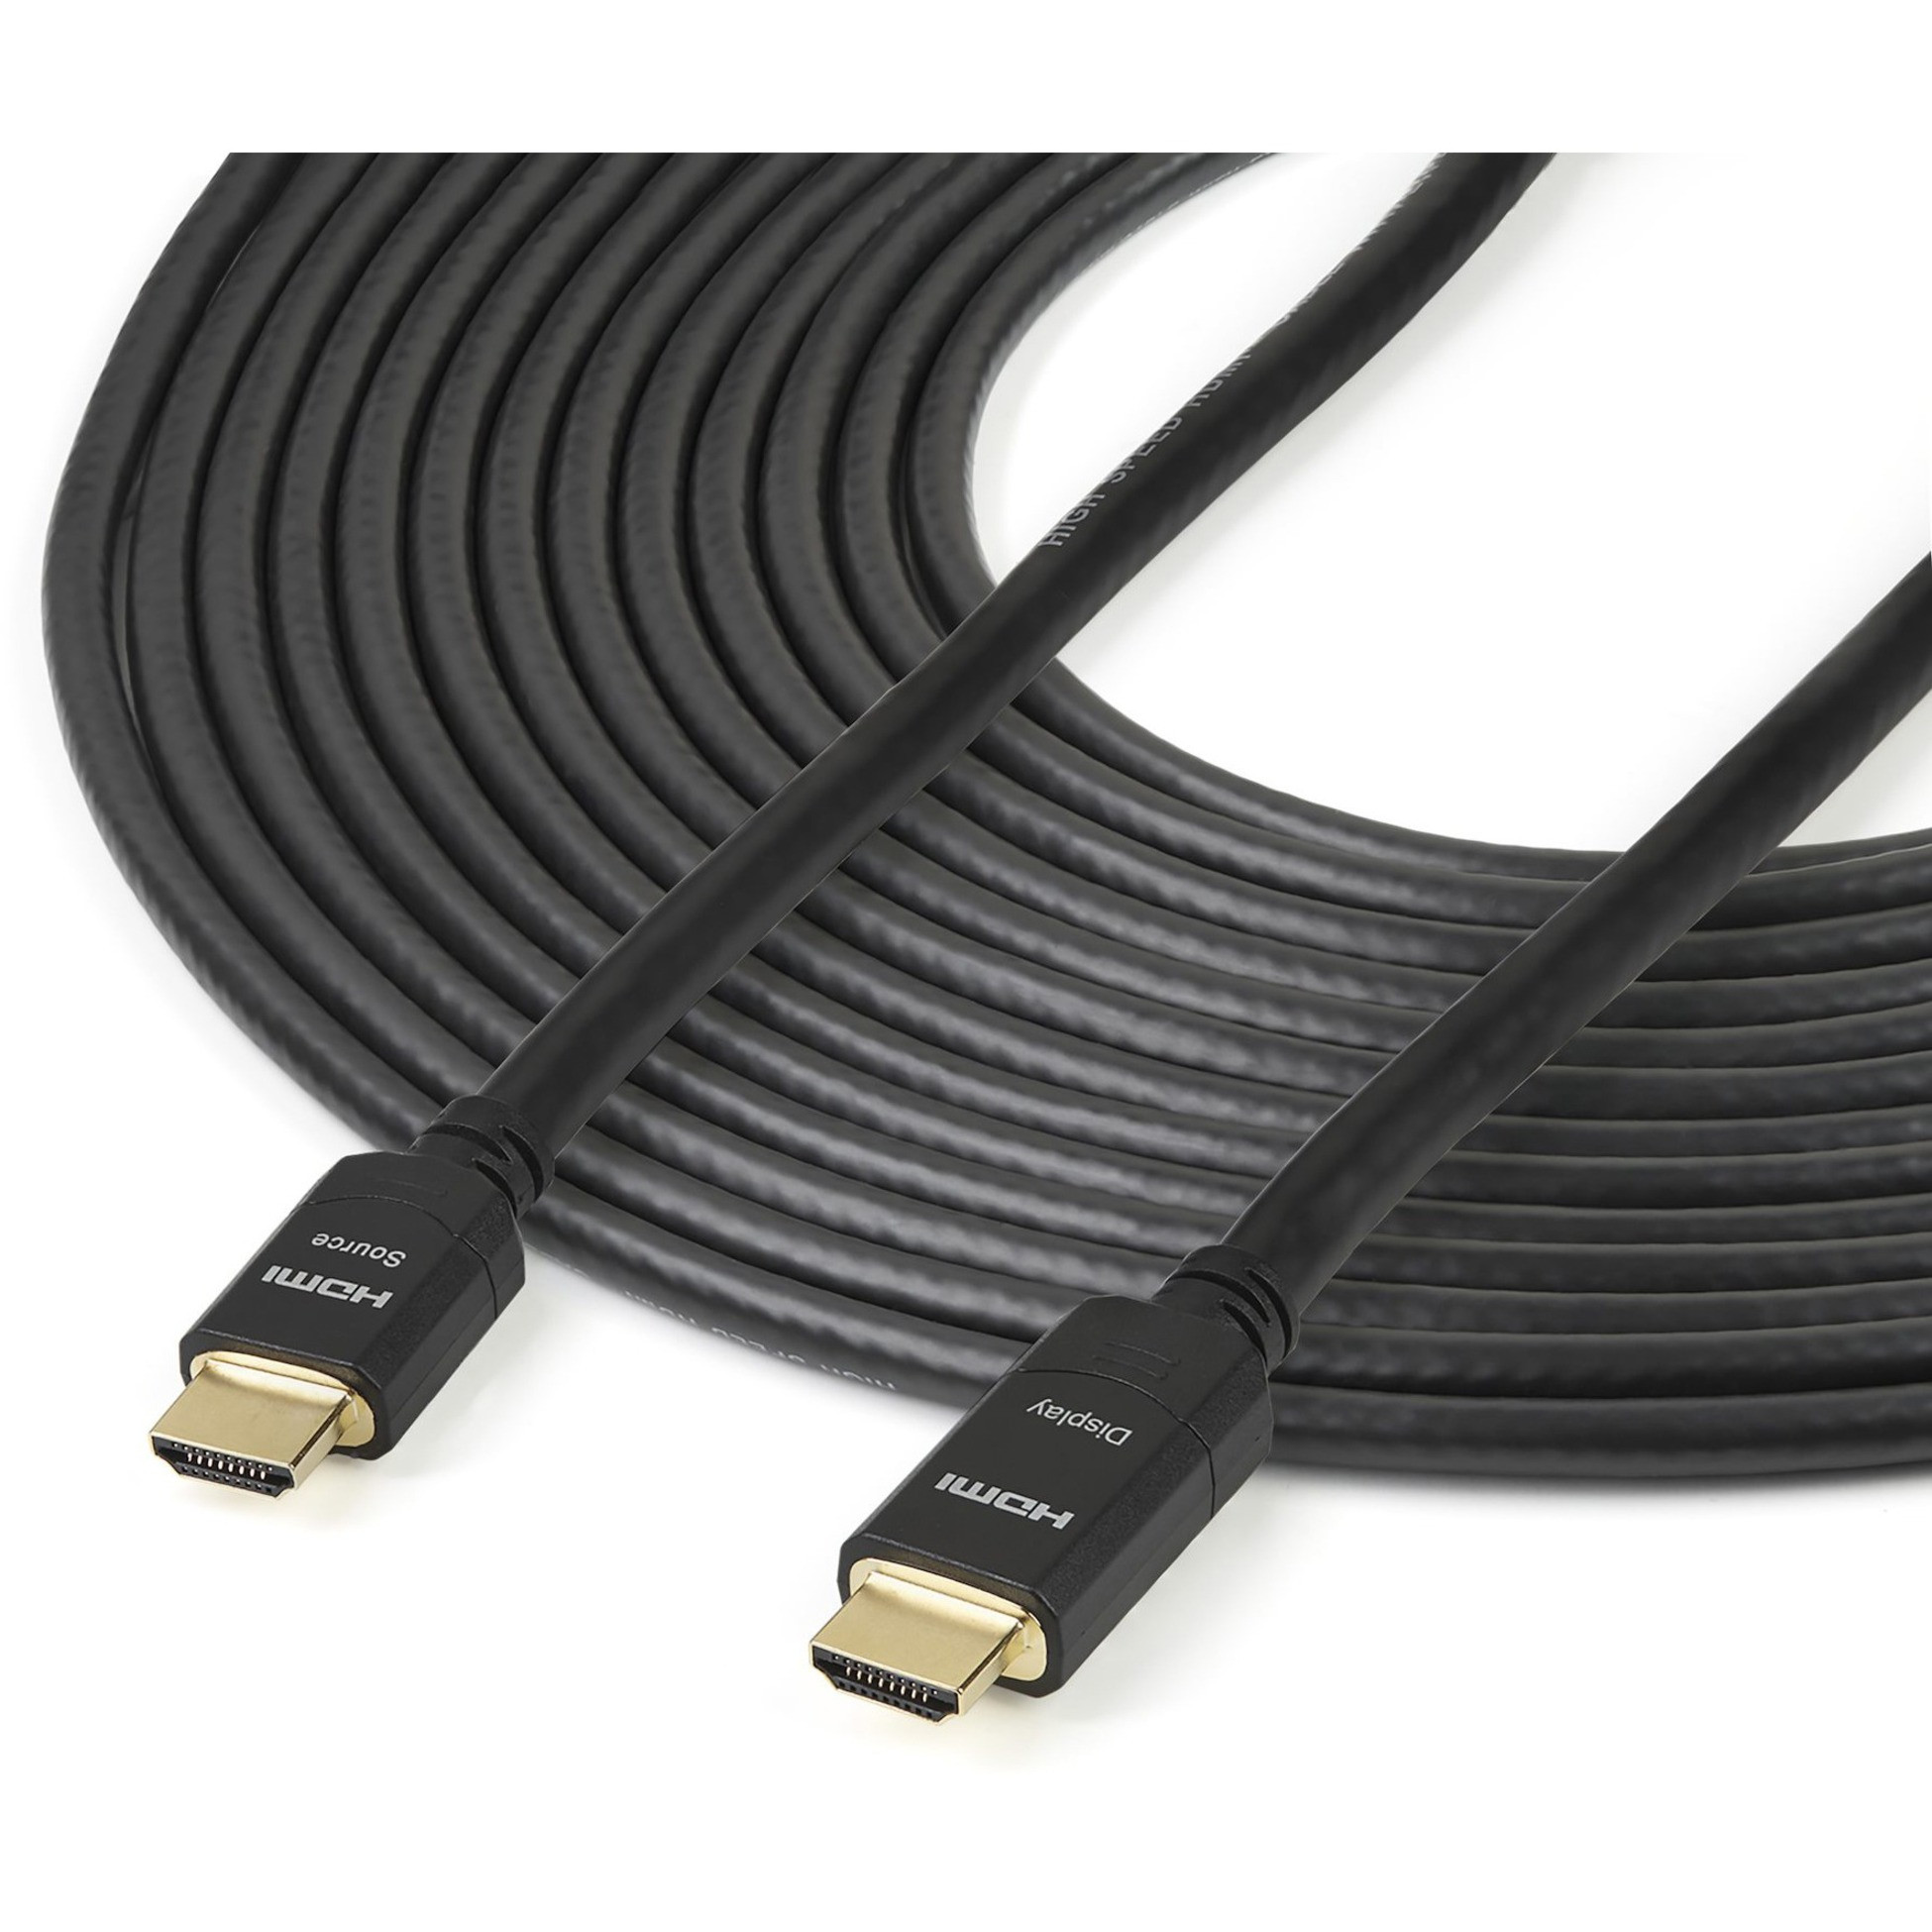 .com 98ft (30m) Active HDMI 4K 30Hz UHD High Speed HDMI 1.4 Cable with Ethernet, CL2 HDMI Cord for In-Wall HDMM30MA - Corporate Armor